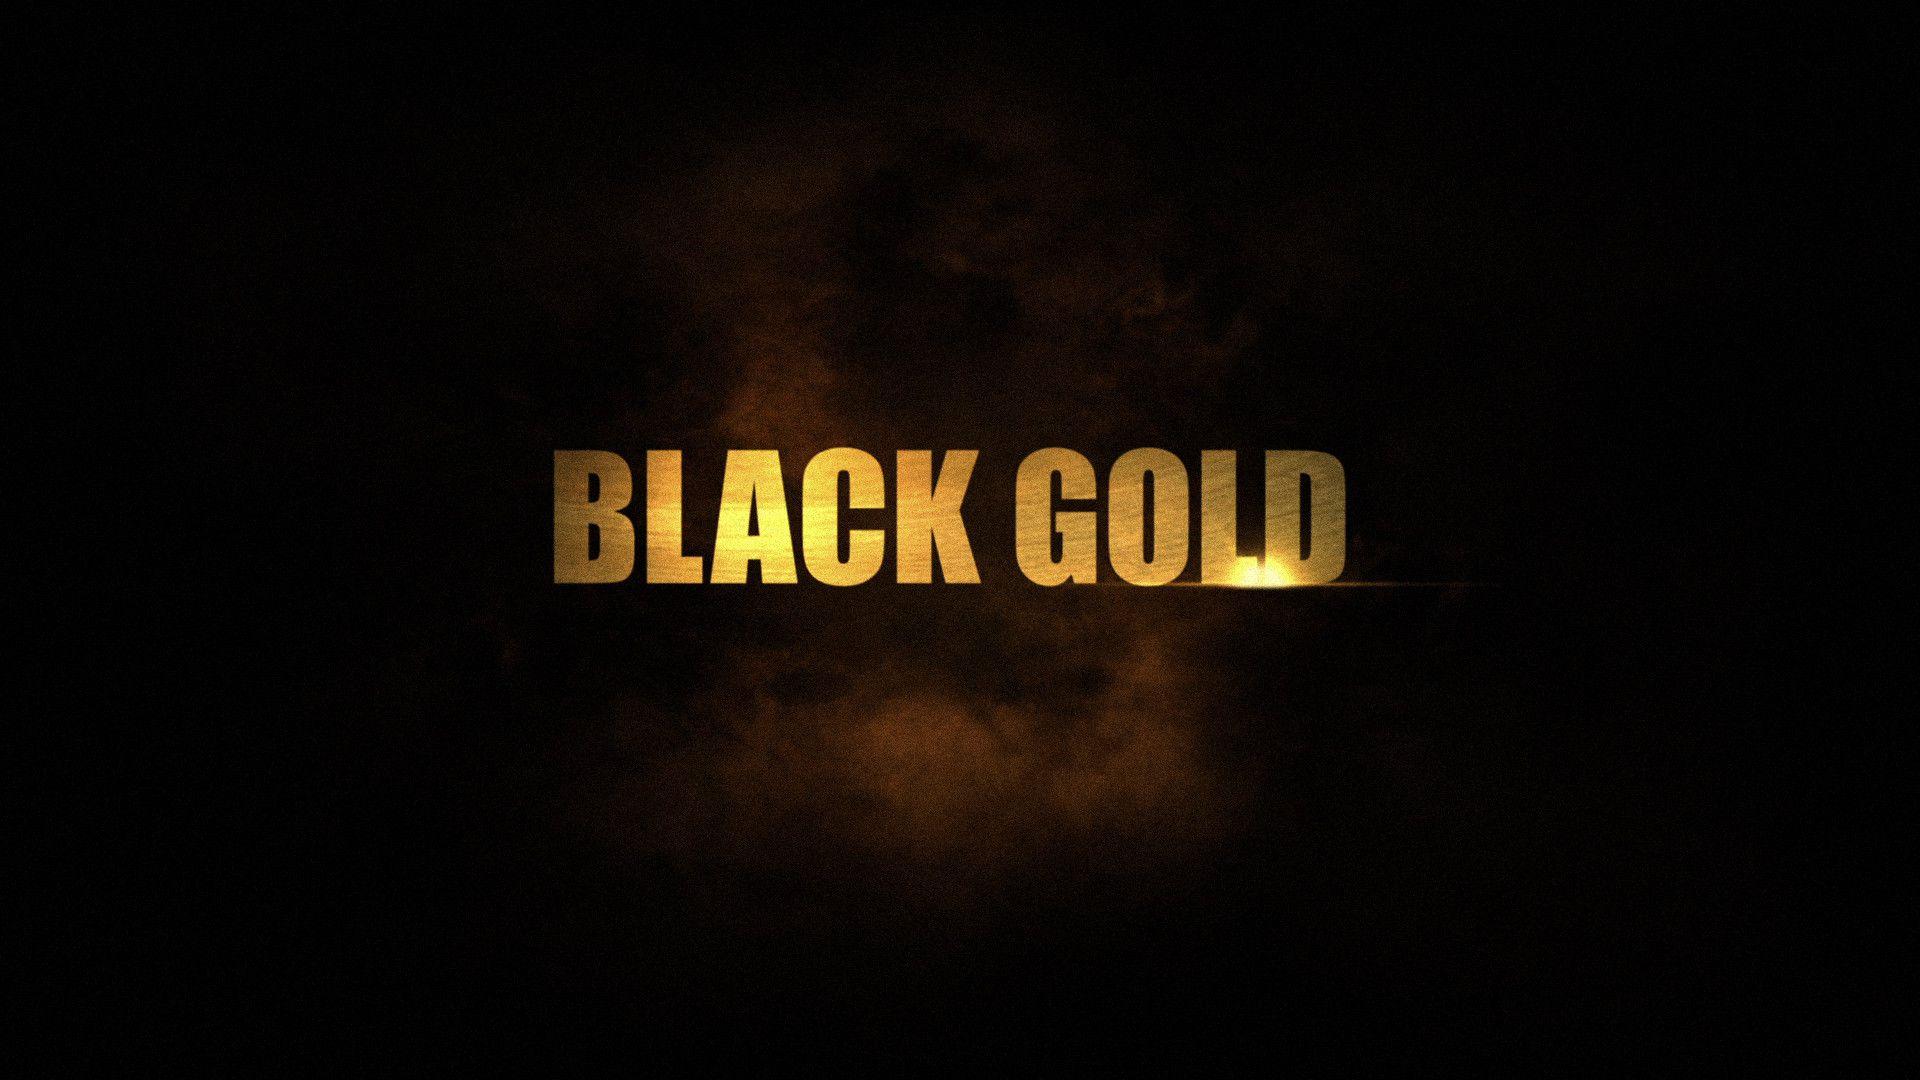 Black And Gold Background 19662 Wallpaper: 3500x2800